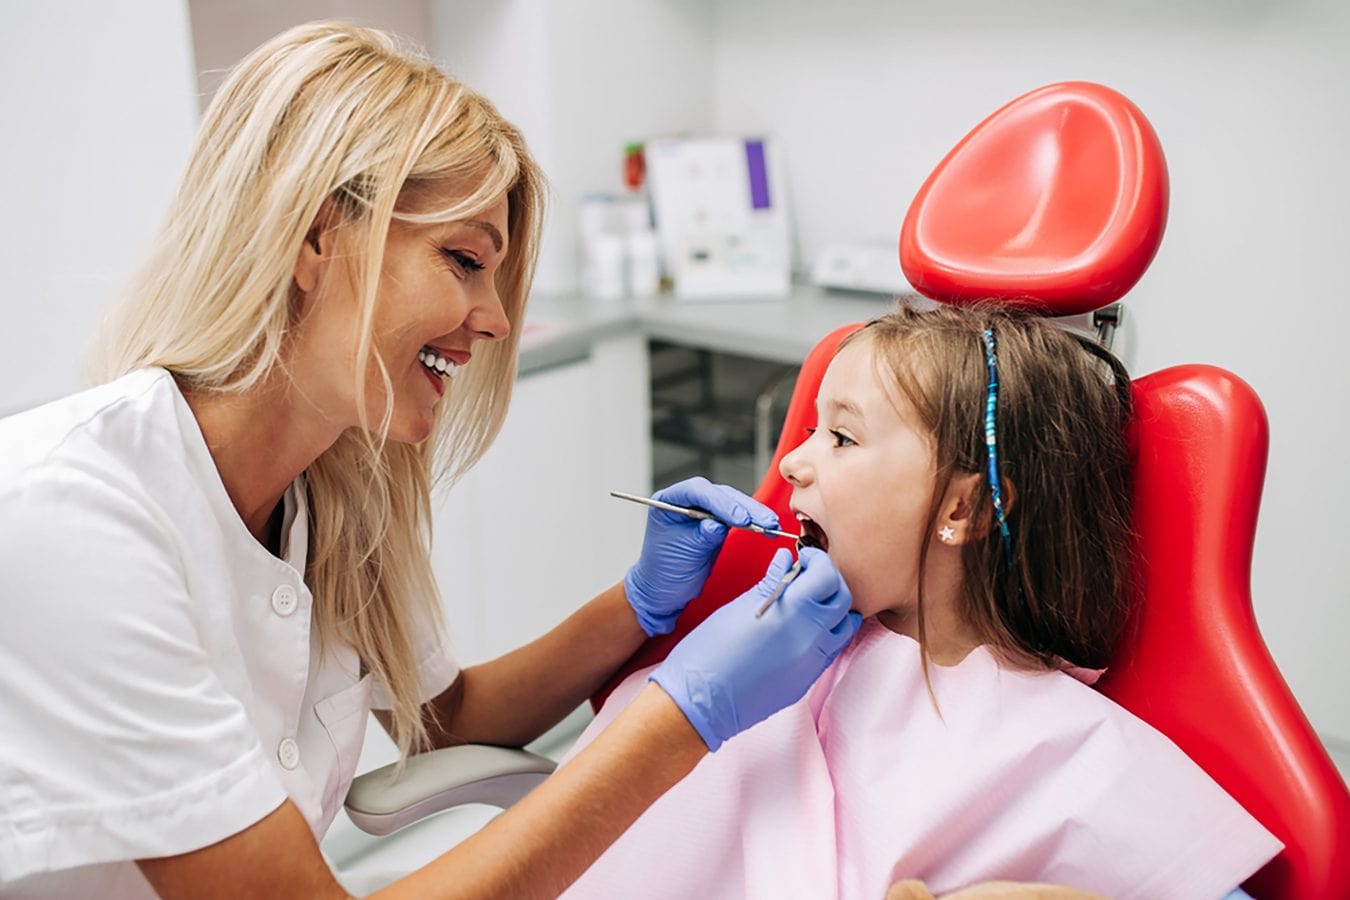 common dental issues kids face and how to help